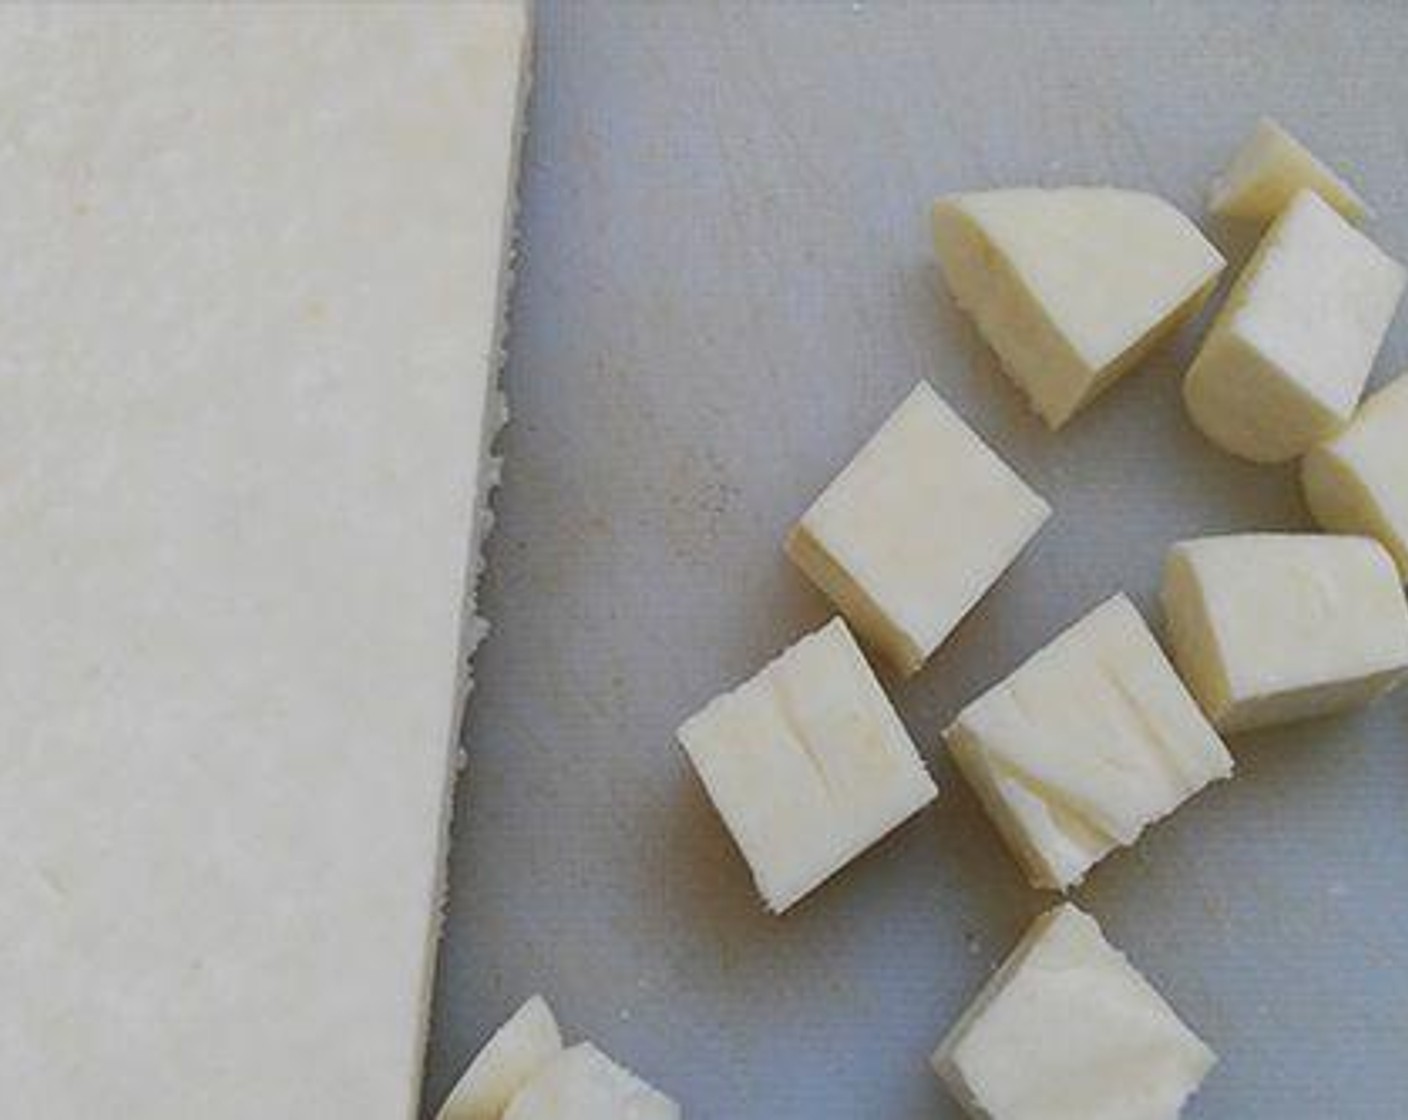 step 5 Let the paneer rest for 1 to 2 hours, by the time it will be set. Take the paneer out of the cloth and cut the paneer to desired shape and size as per your wish. Store in an airtight container in the fridge and use it to many of your favorite paneer dishes.